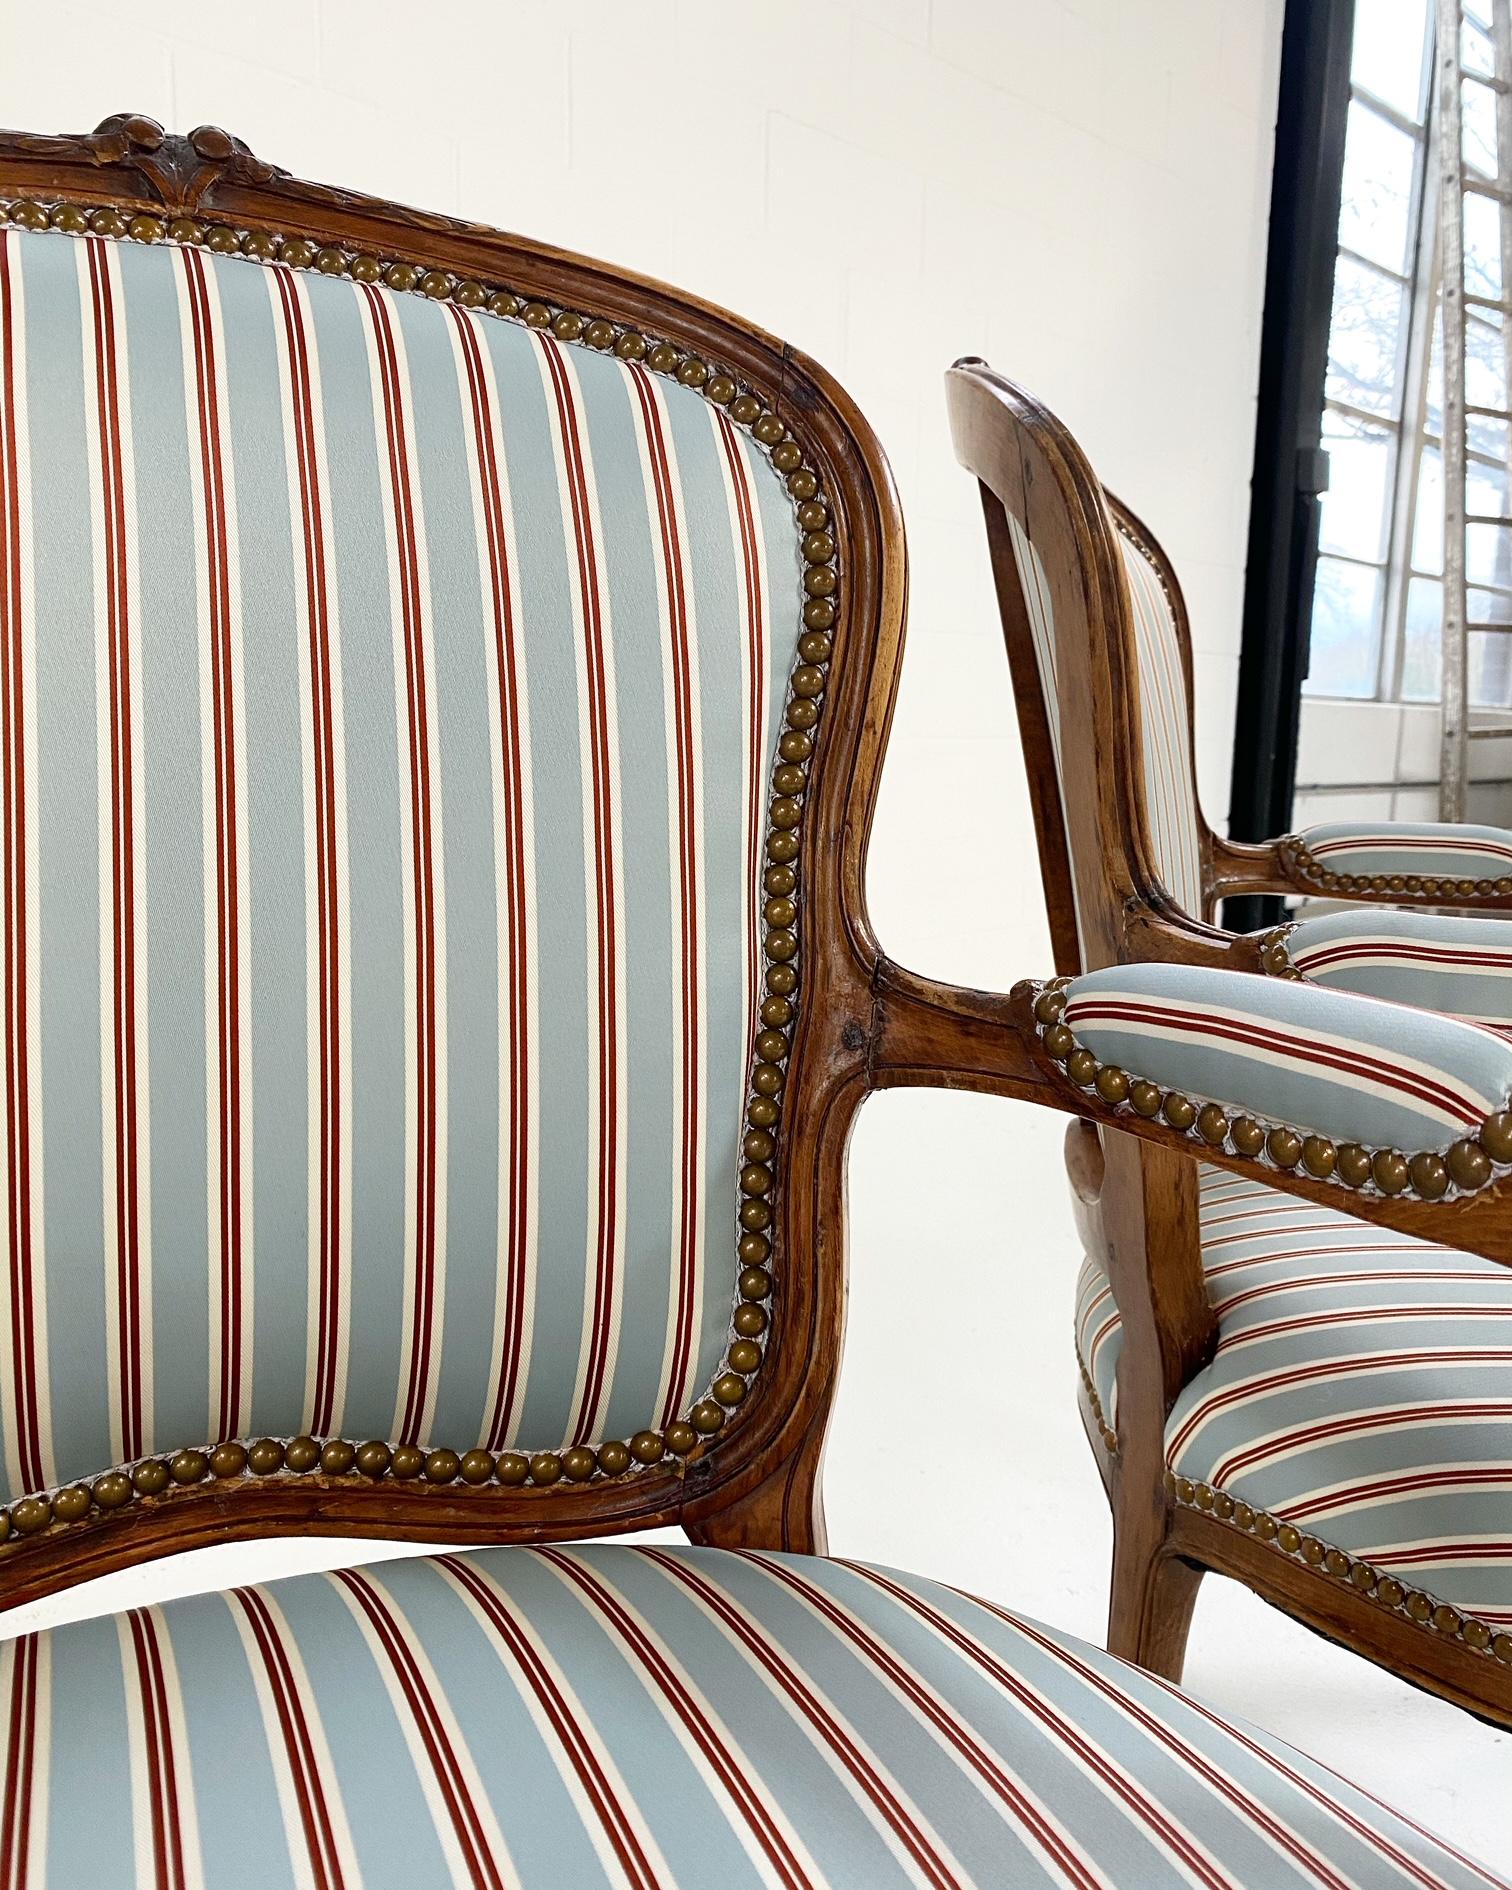 We love the frame of a Louis chair. The gorgeous beechwood is perfectly-aged and was ripe for something cool and Classic, so we chose a beautiful silk fabric specially made by Dedar for our favorite Italian luxury blog, Issimo. The color combination